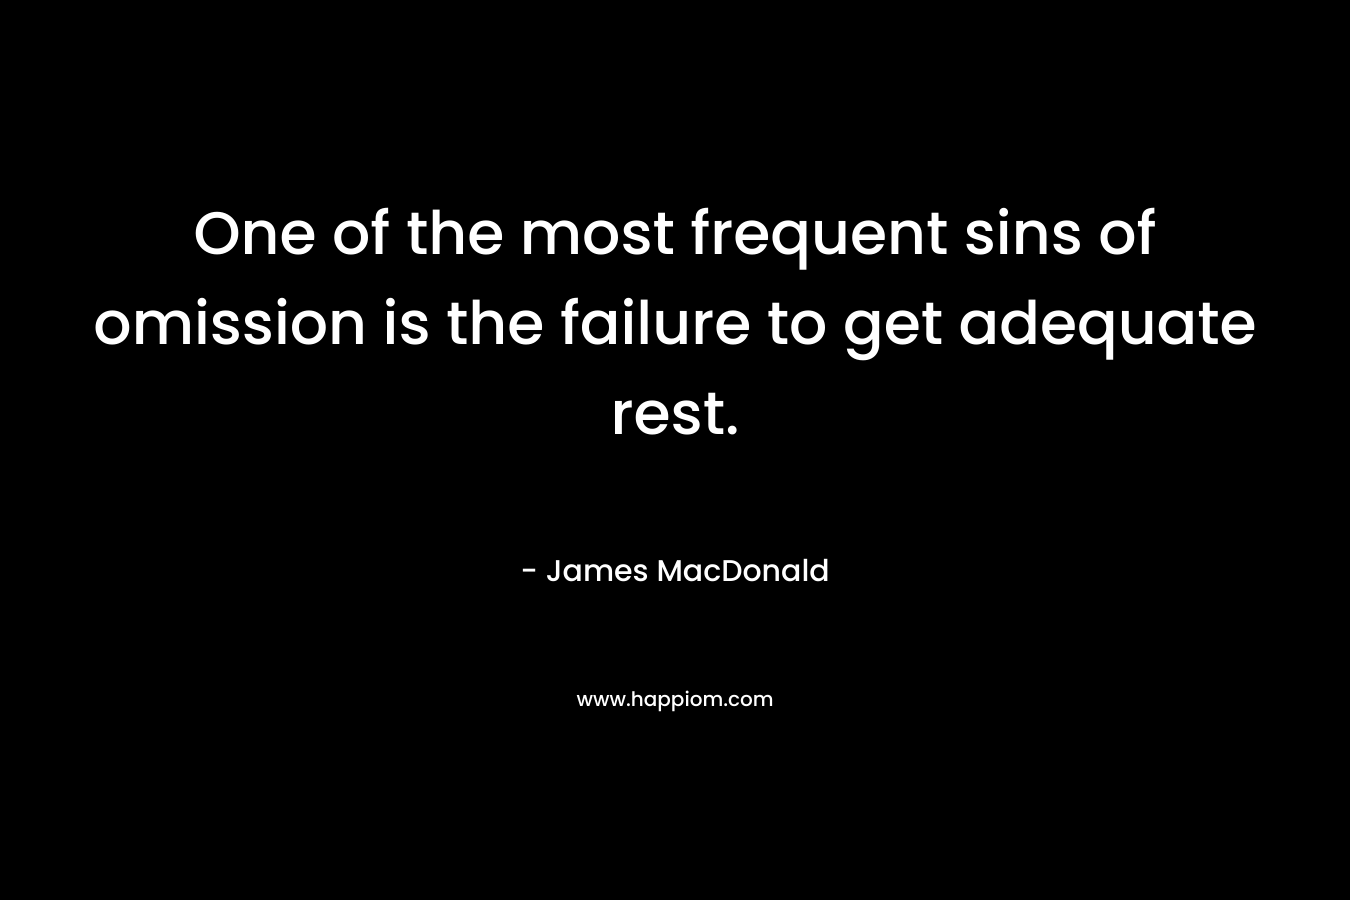 One of the most frequent sins of omission is the failure to get adequate rest. – James MacDonald